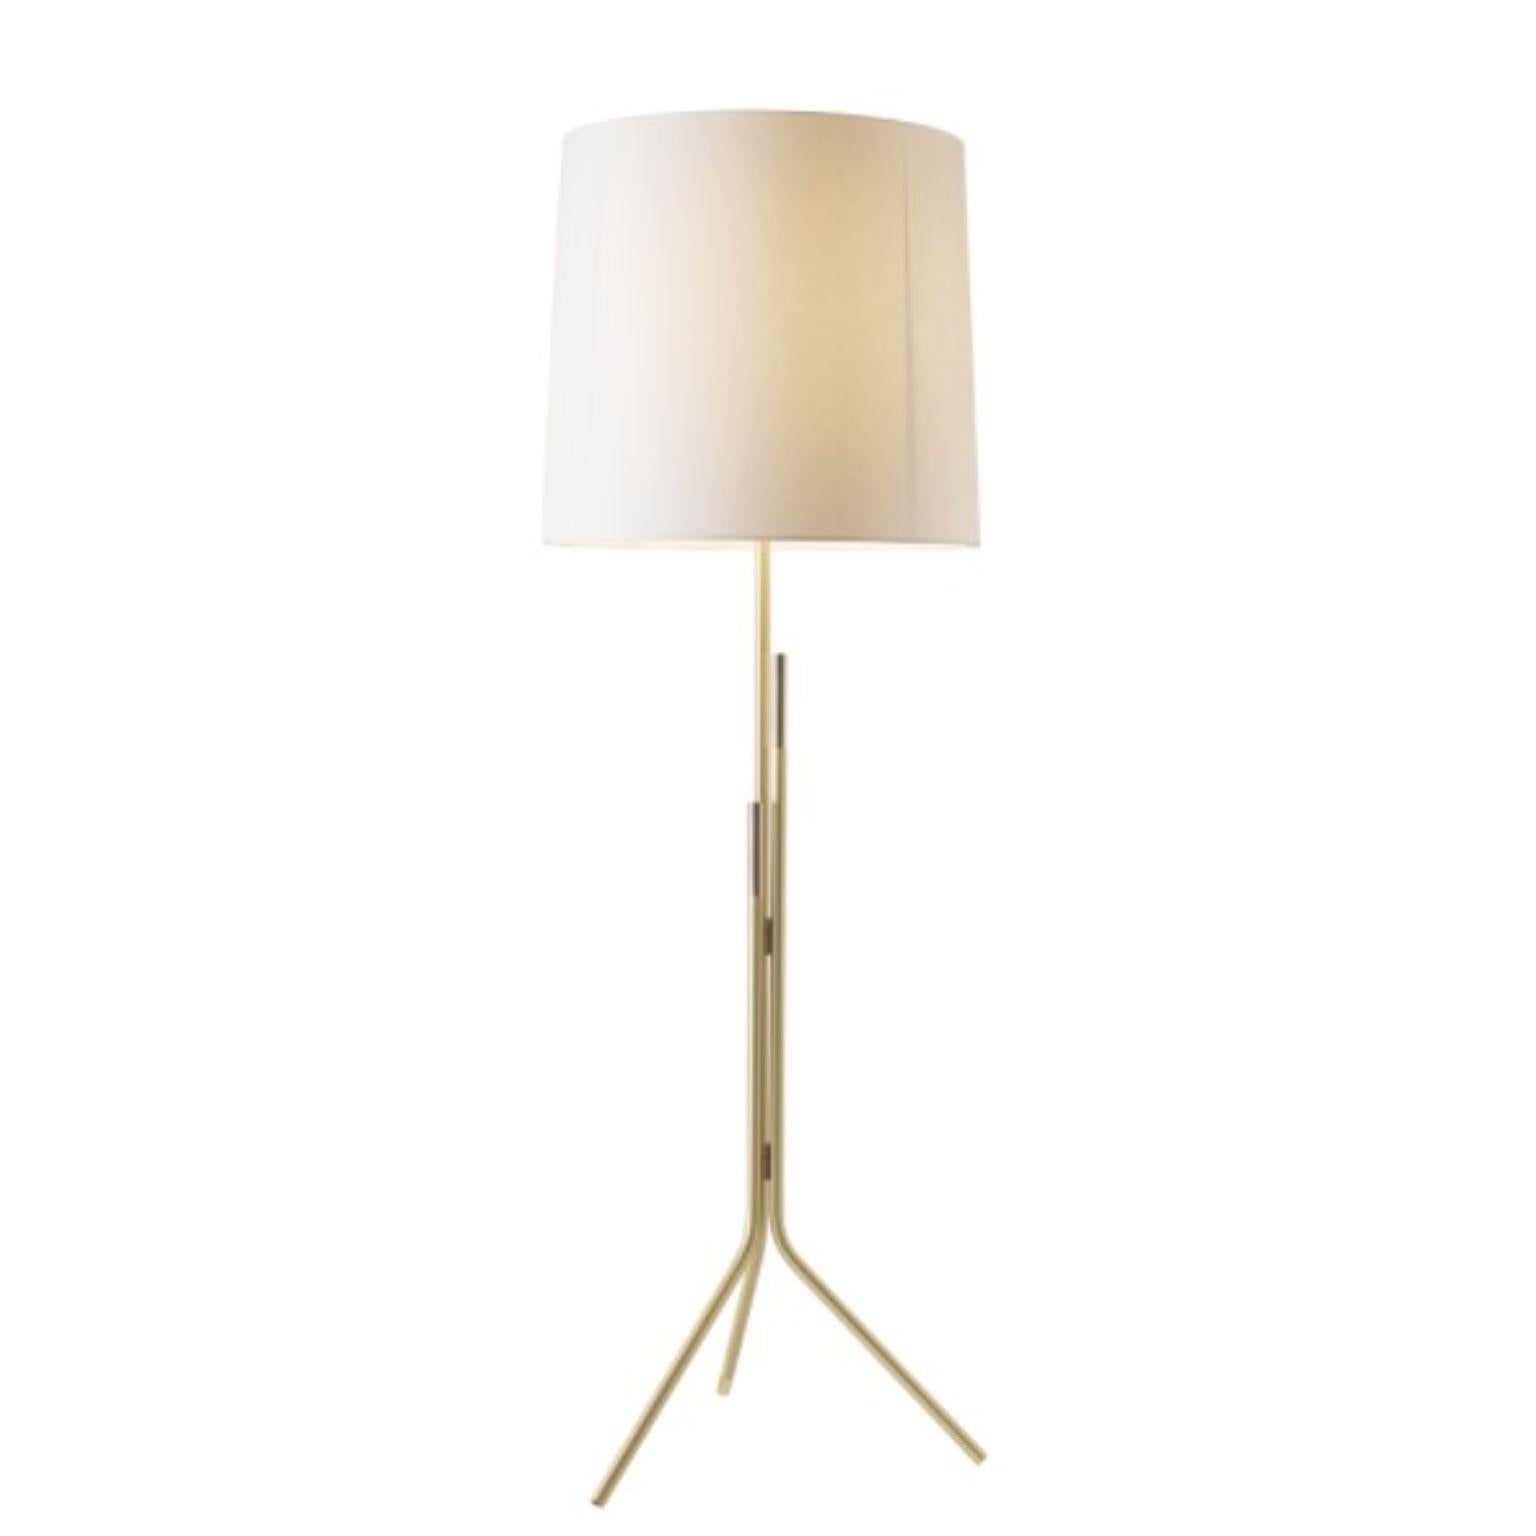 Ellis Floor Lamp by Hervé Langlais
Dimensions: D60x H55 cm
Materials: Solid brass, Lampshade Drop Paper® M1, Black textile cable (2m).
Others finishes and dimensions are available.

All our lamps can be wired according to each country. If sold